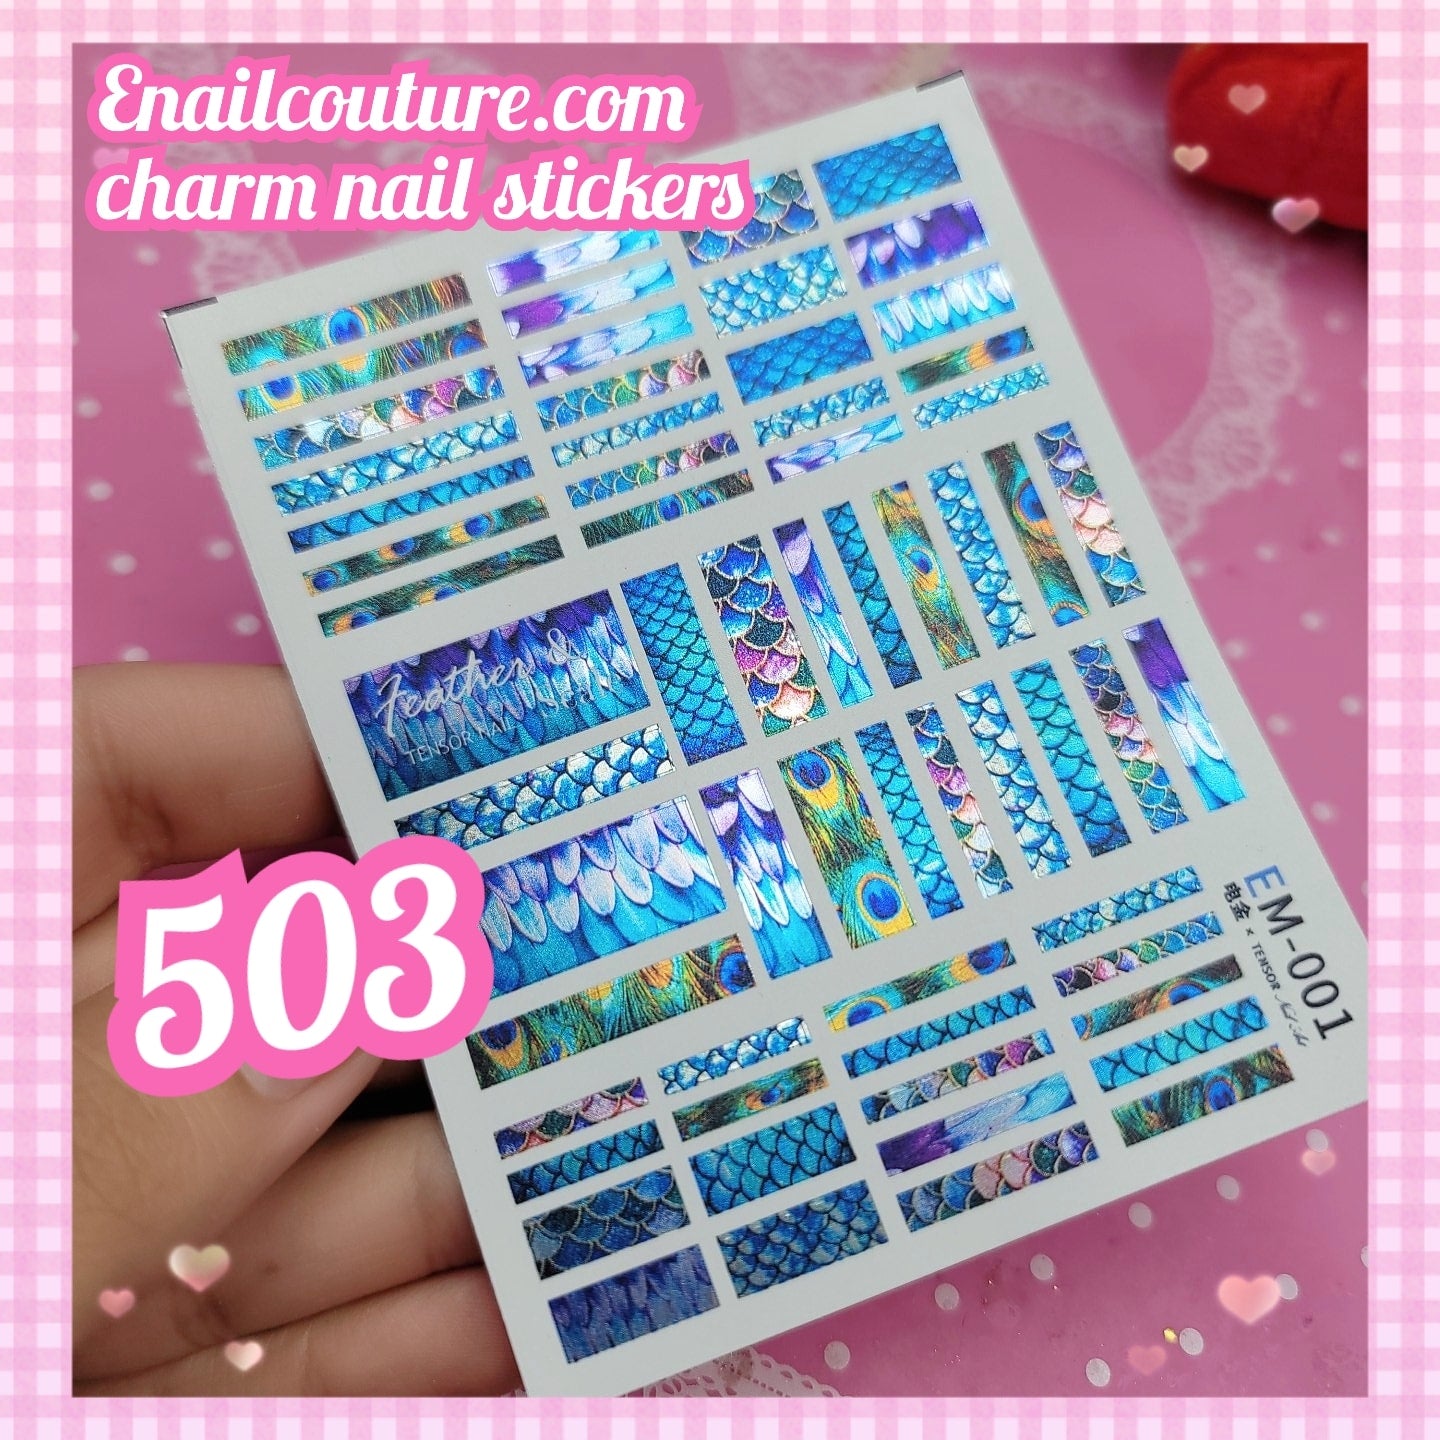 White Moon Patterns Cloud Galaxy Constellation Meteor 3D Nail Art Stickers  A048 | eBay